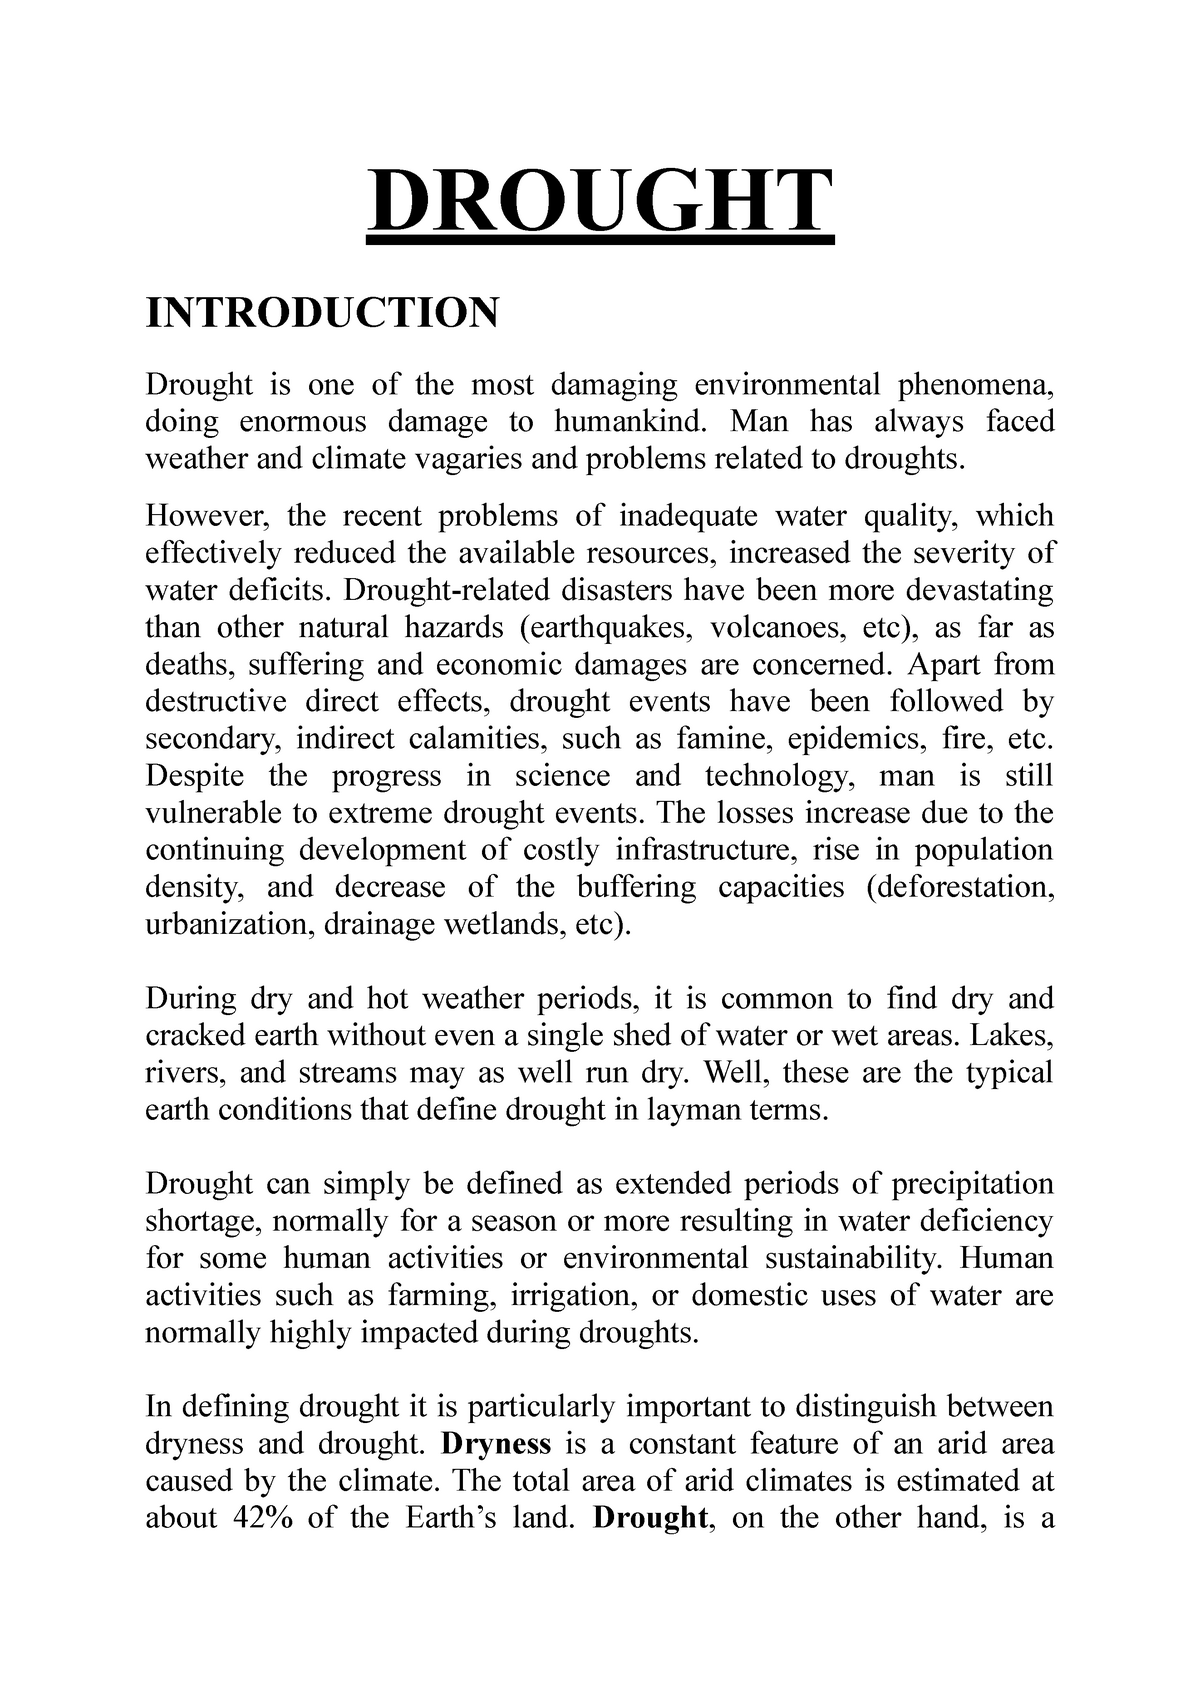 essay on drought class 10